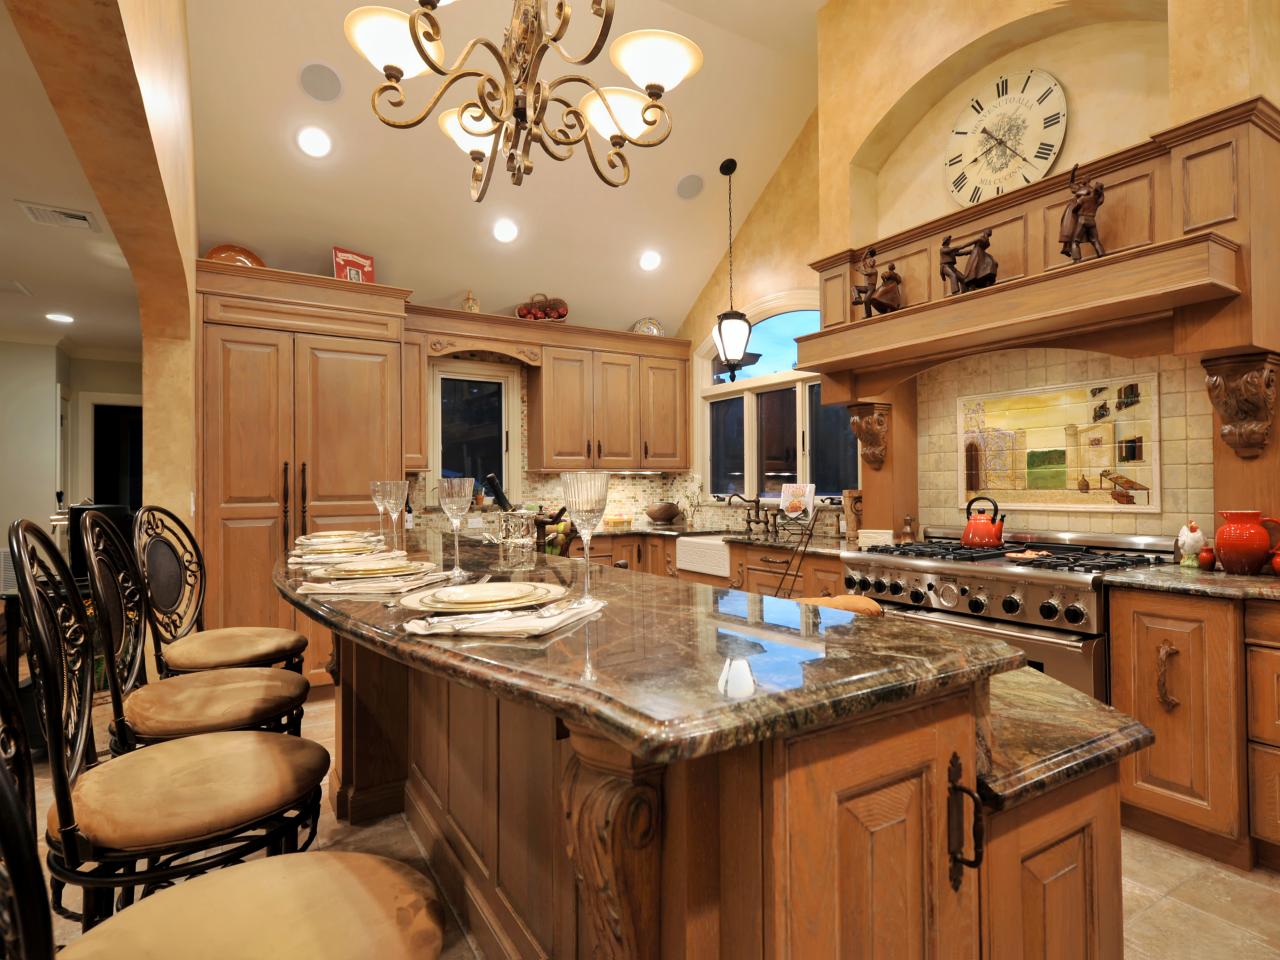 kitchen island two mediterranean tiered style islands designs granite hgtv seating kitchens bar country room kelly countertops dining ken tier